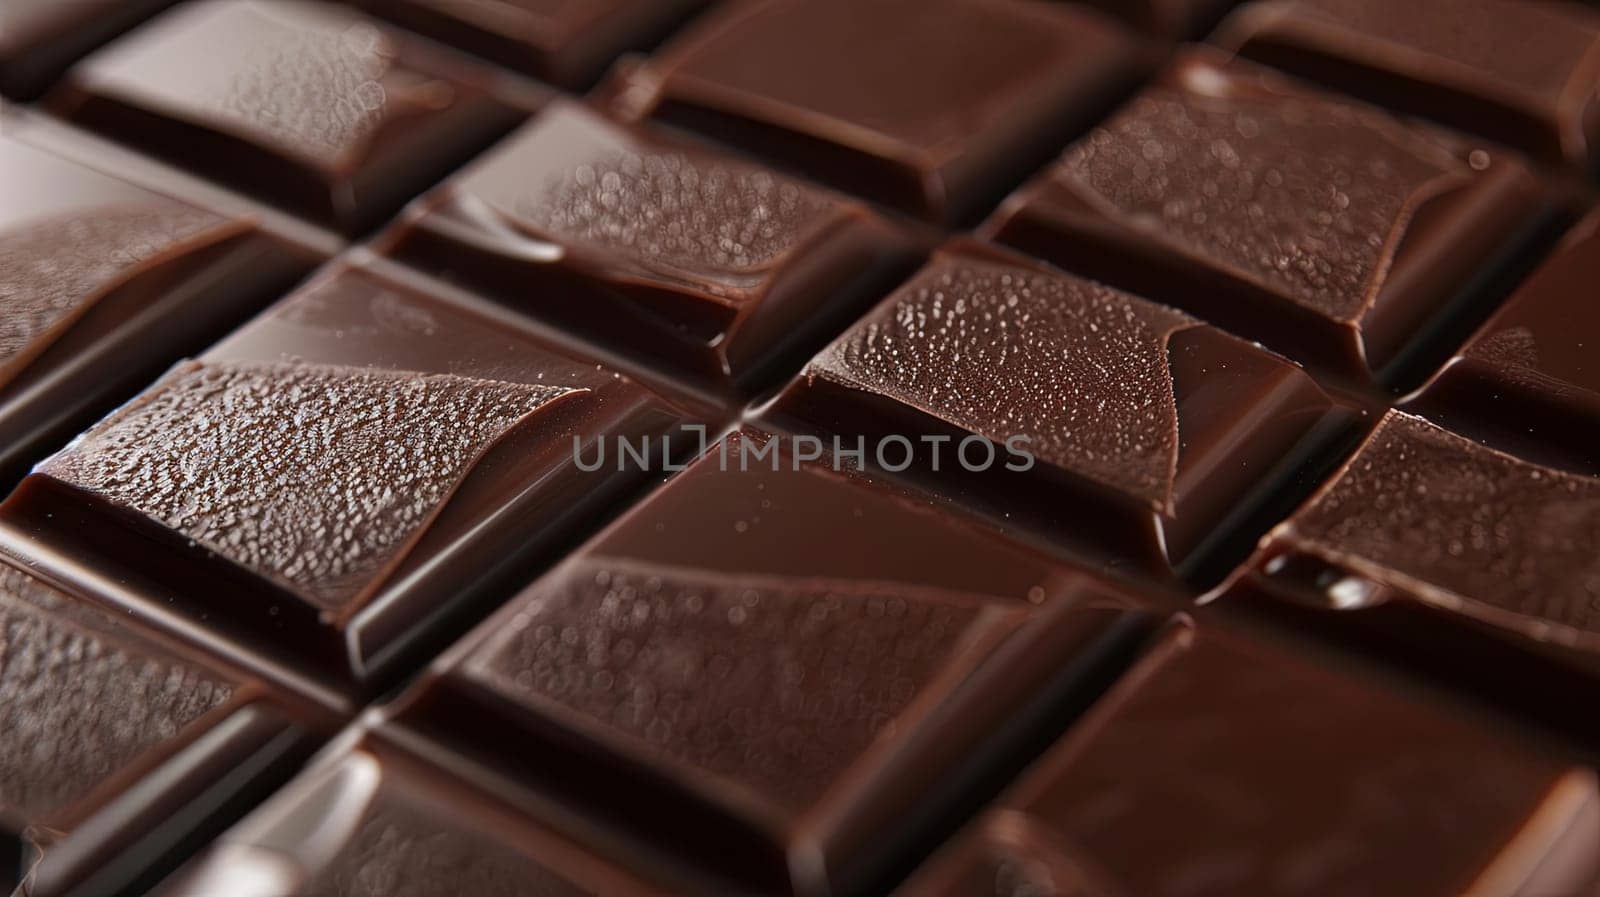 Detailed close-up of a dark chocolate bar with visible break lines and an even surface.